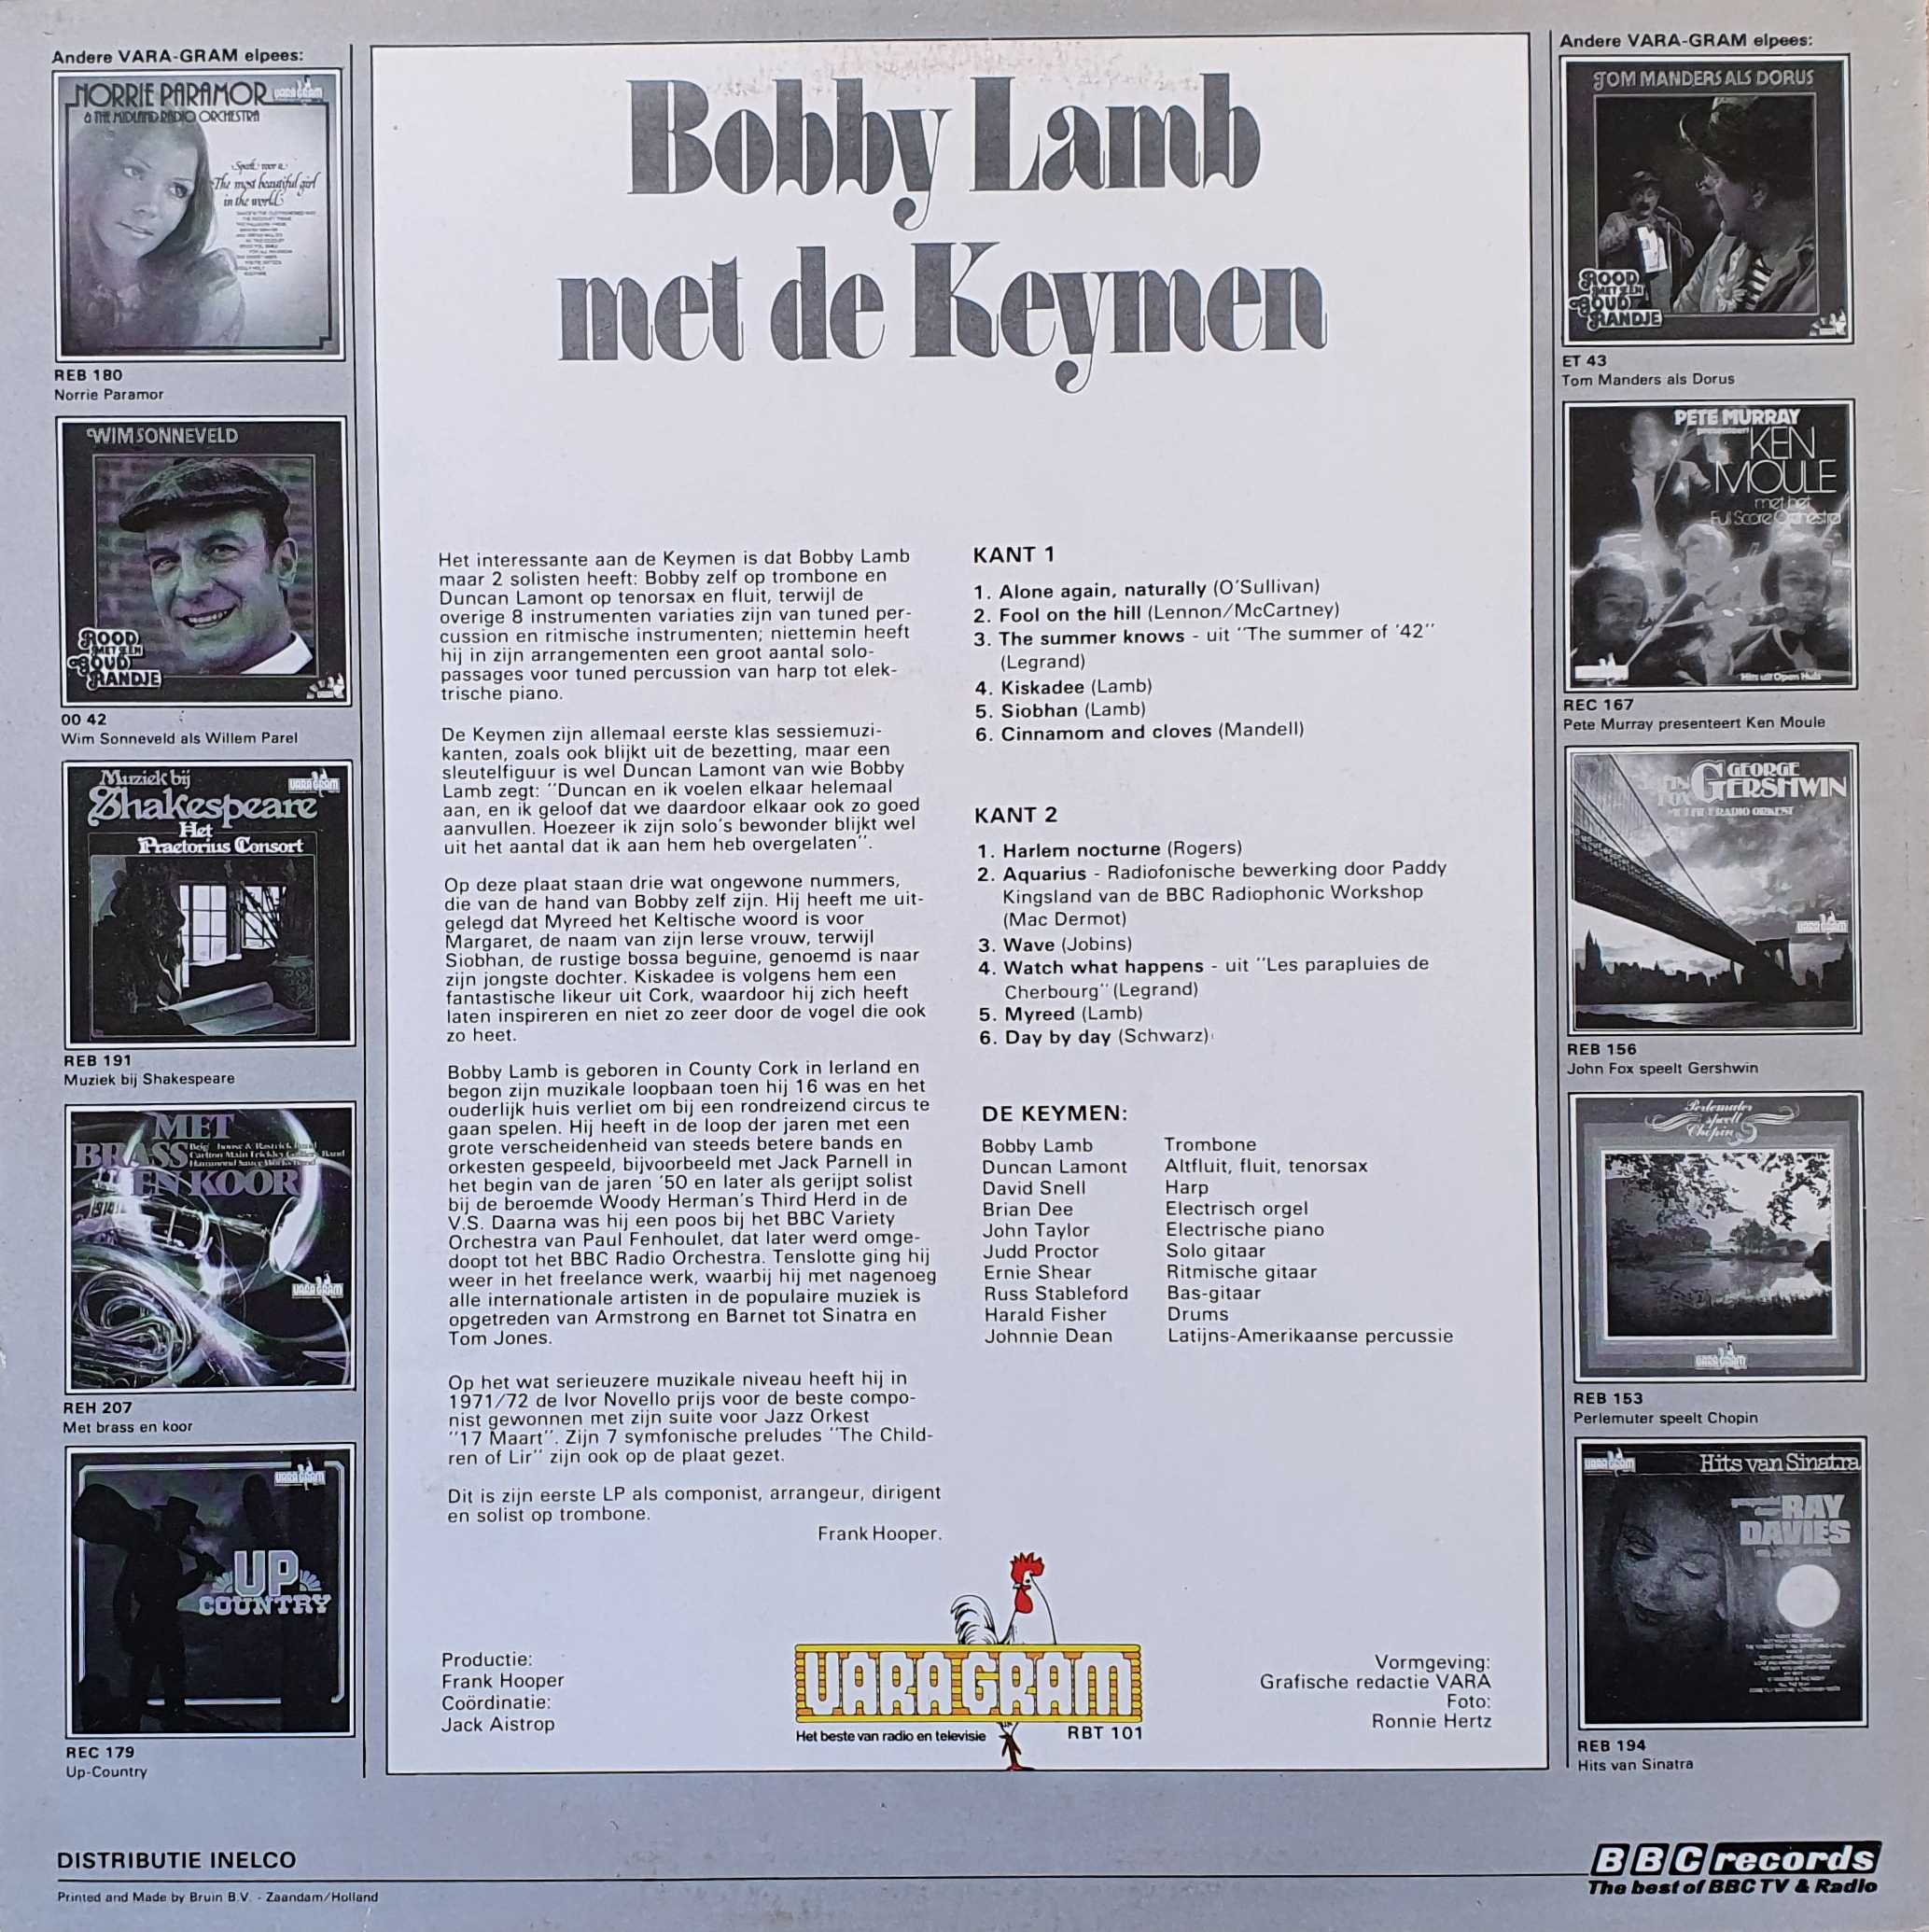 Picture of RBT 101-iD Bobby, Lamb met de Keymen by artist Various from the BBC records and Tapes library